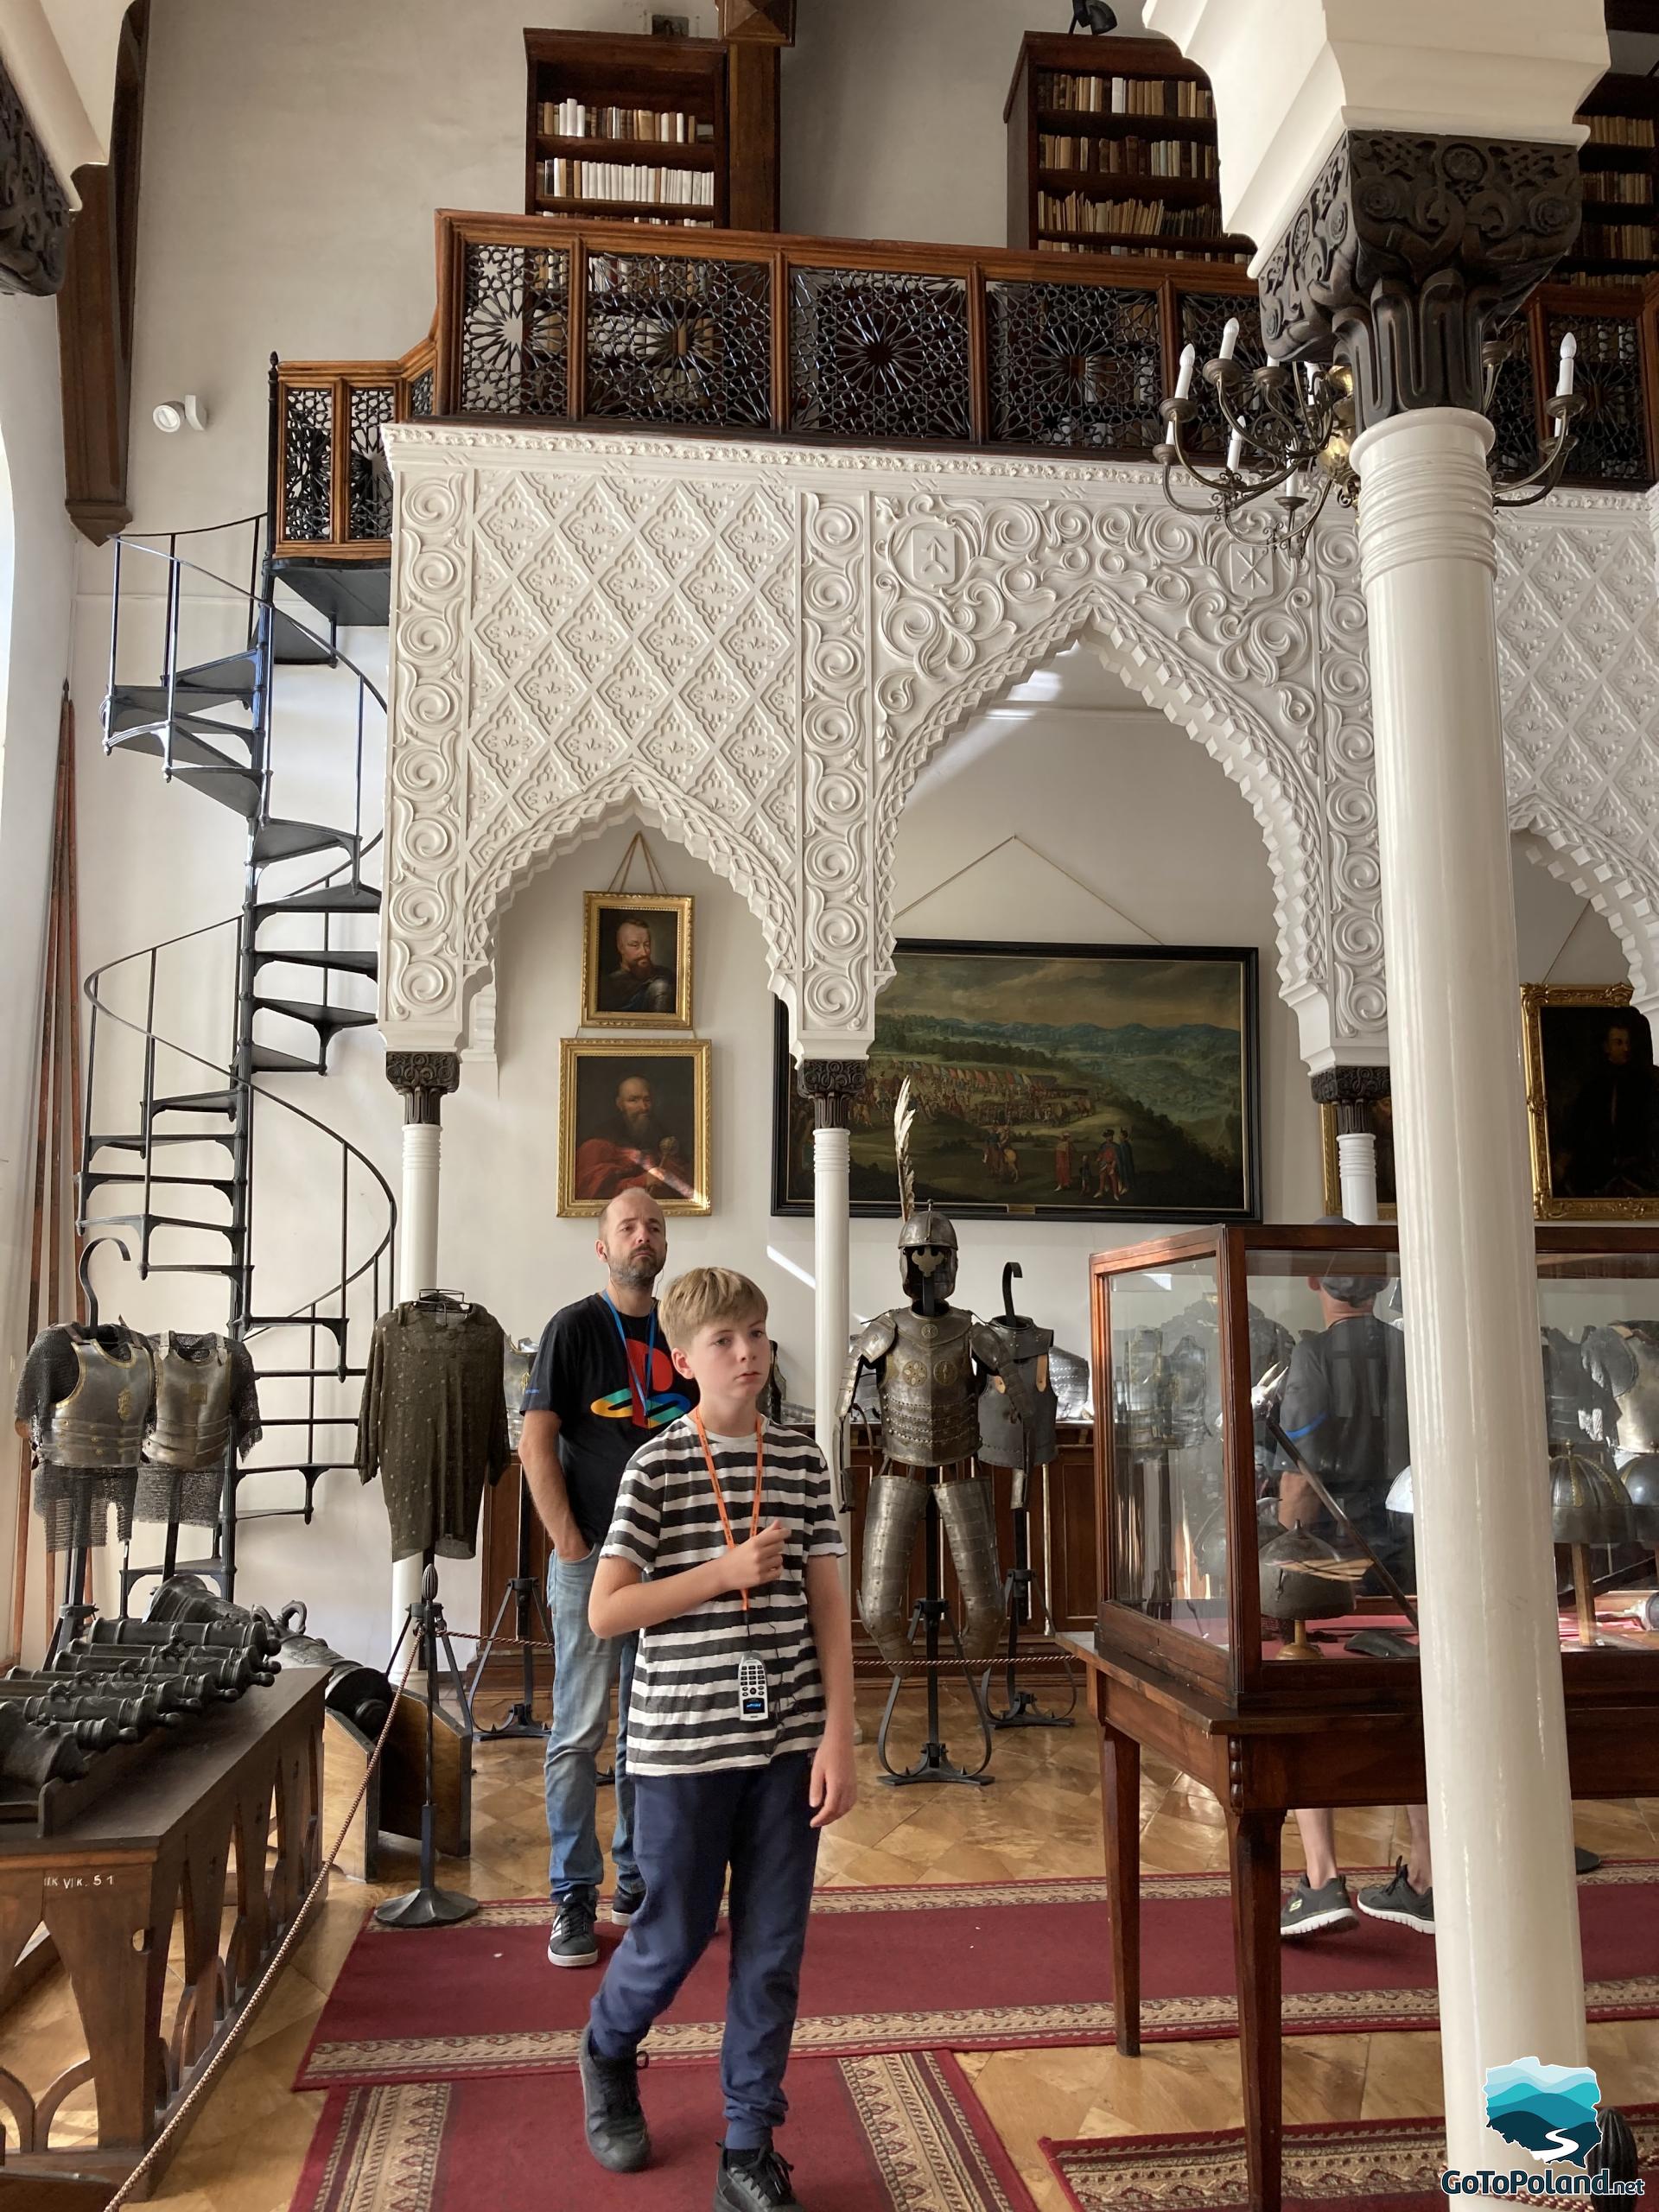 a man and a boy are looking at military souvenirs, gun barrels, armor, they are in a room whose architecture resembles Arabic patterns